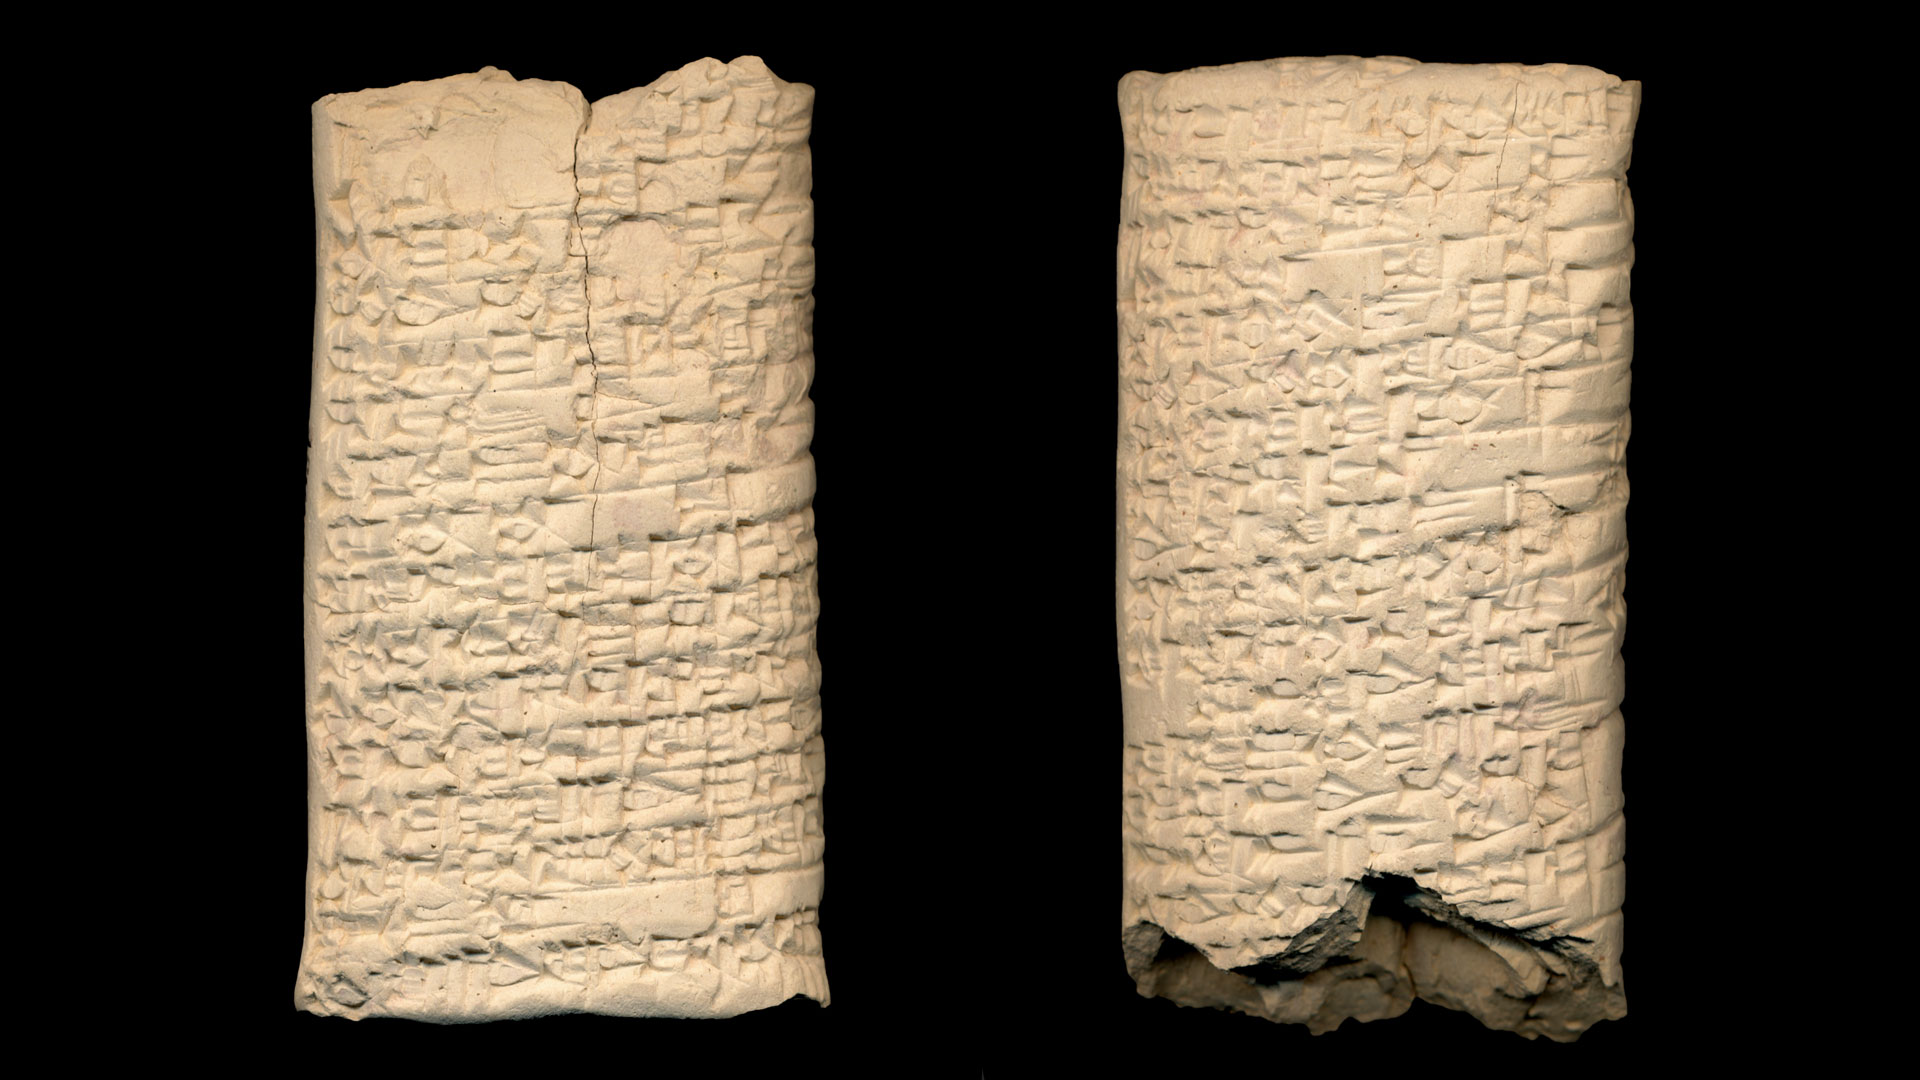 front and back of an ancient cuneiform tablet side by side